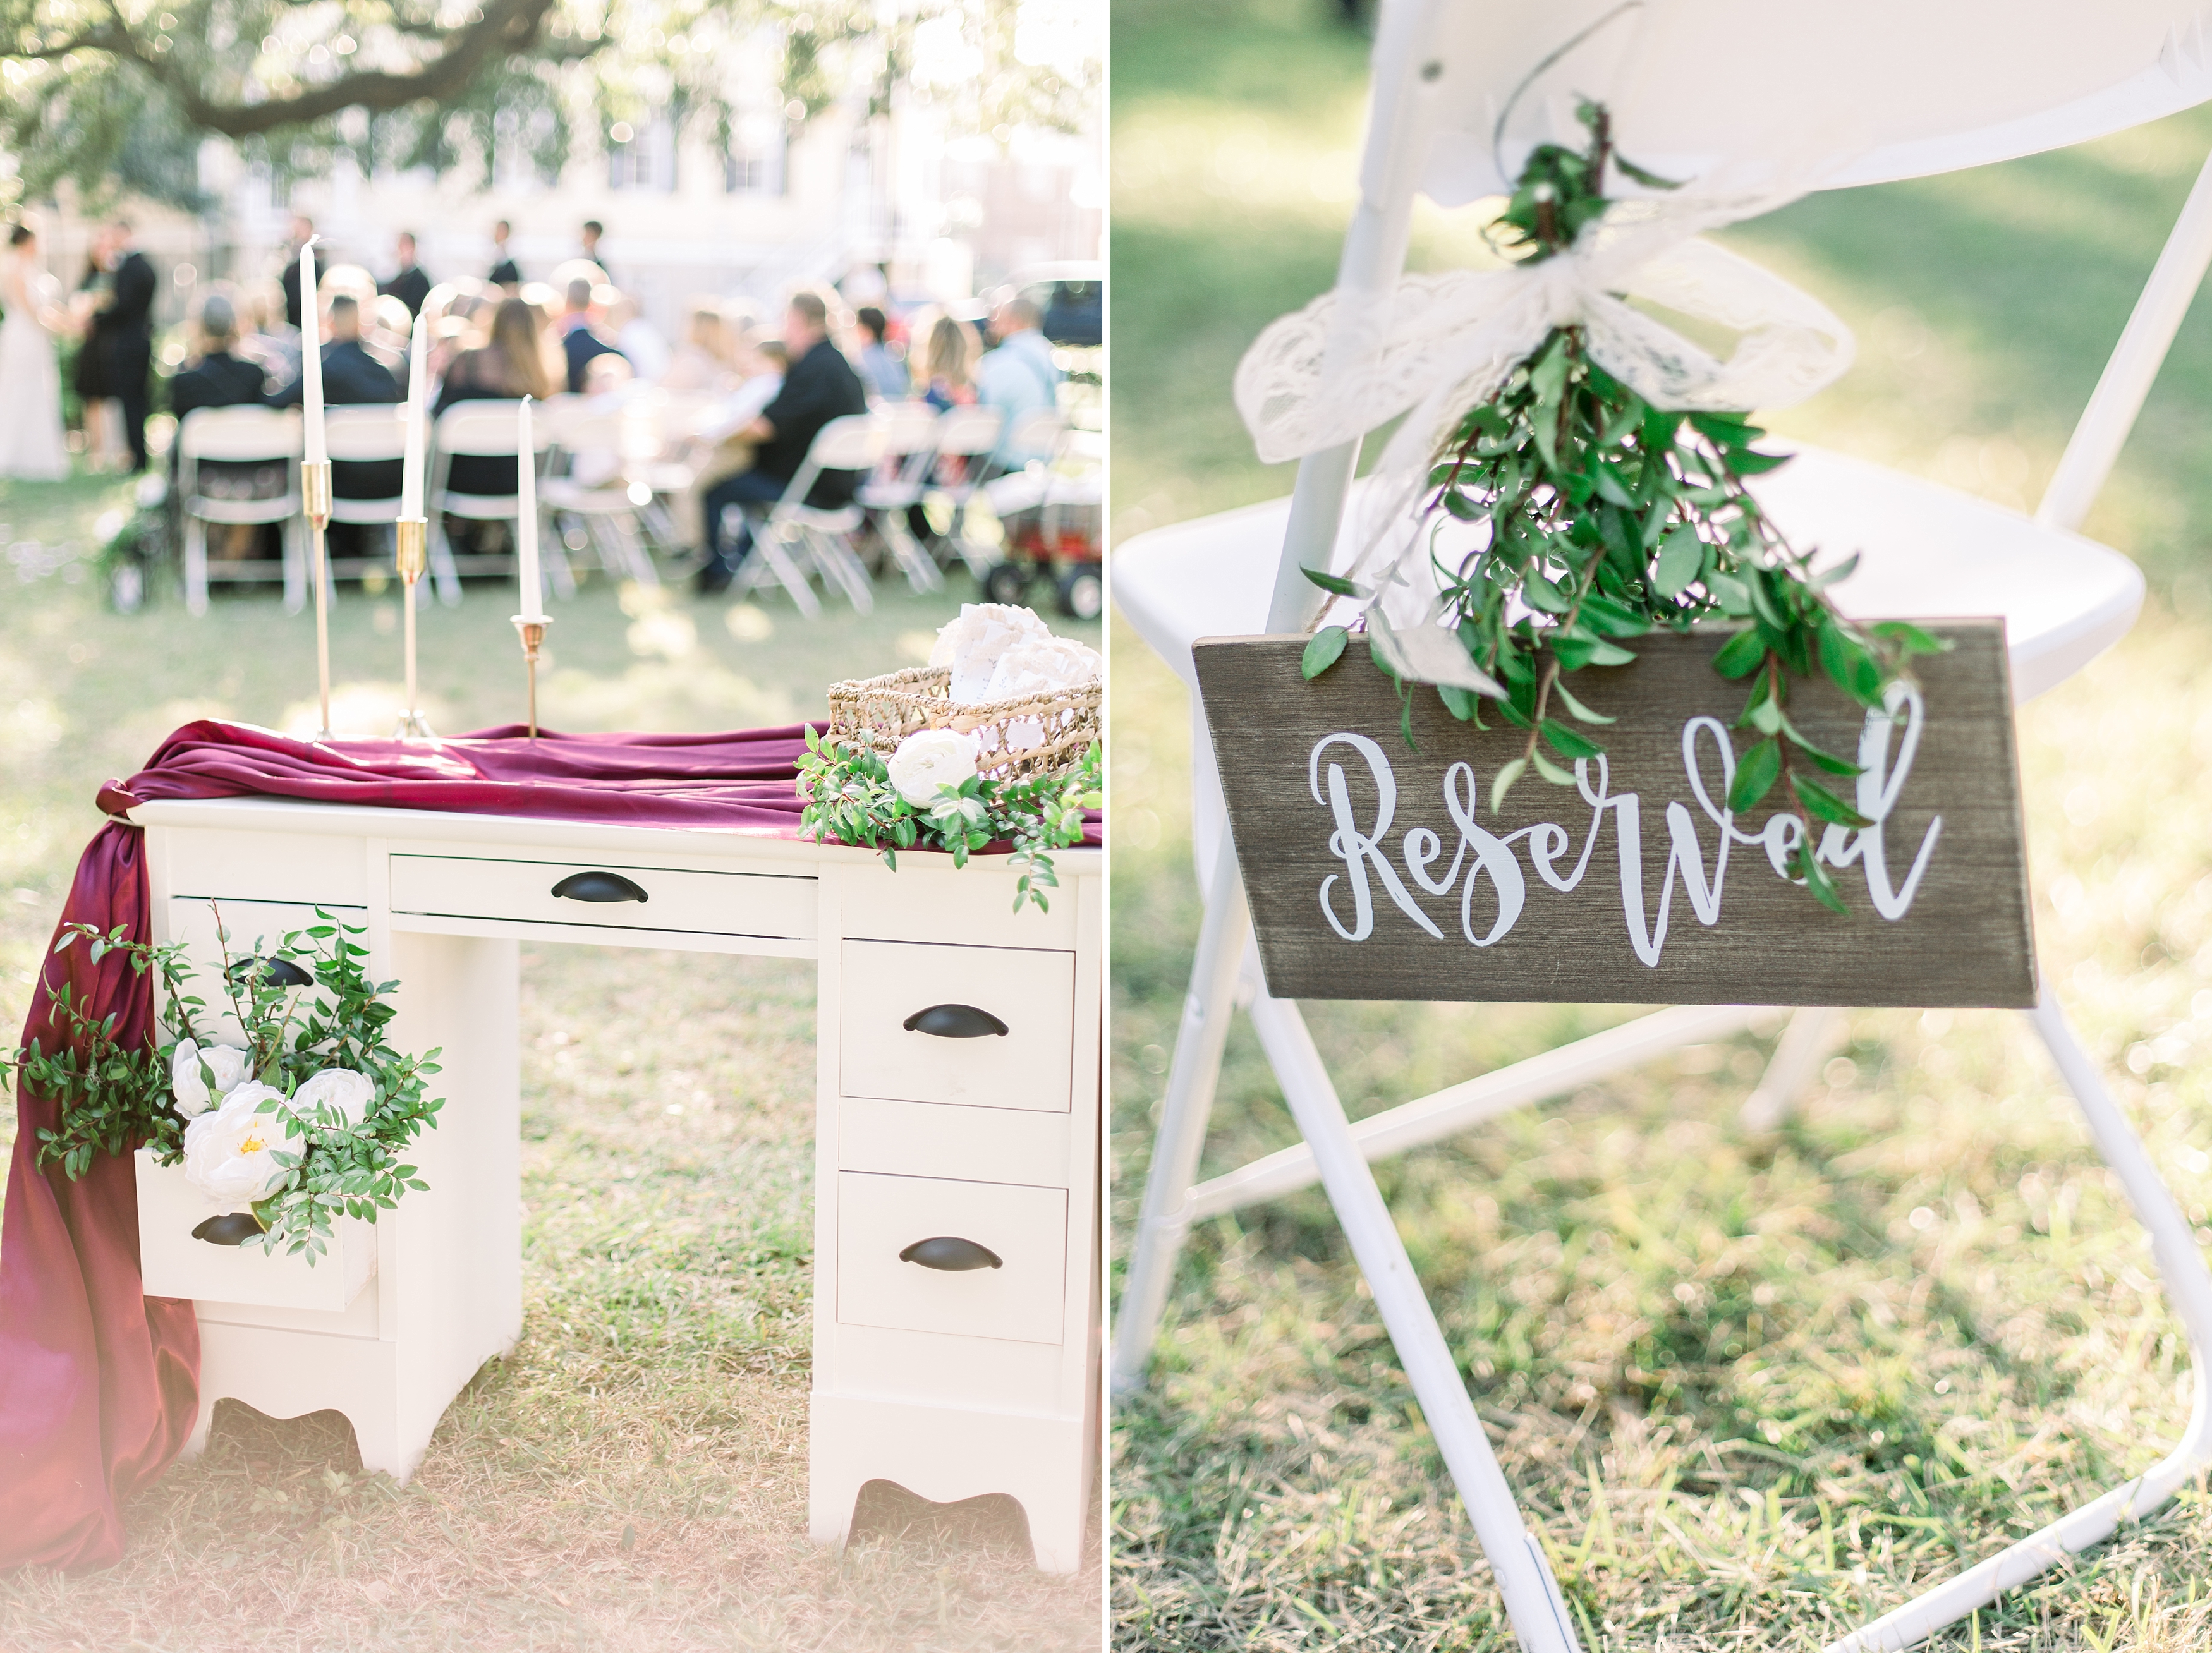 Wedding day details for outdoor ceremony.